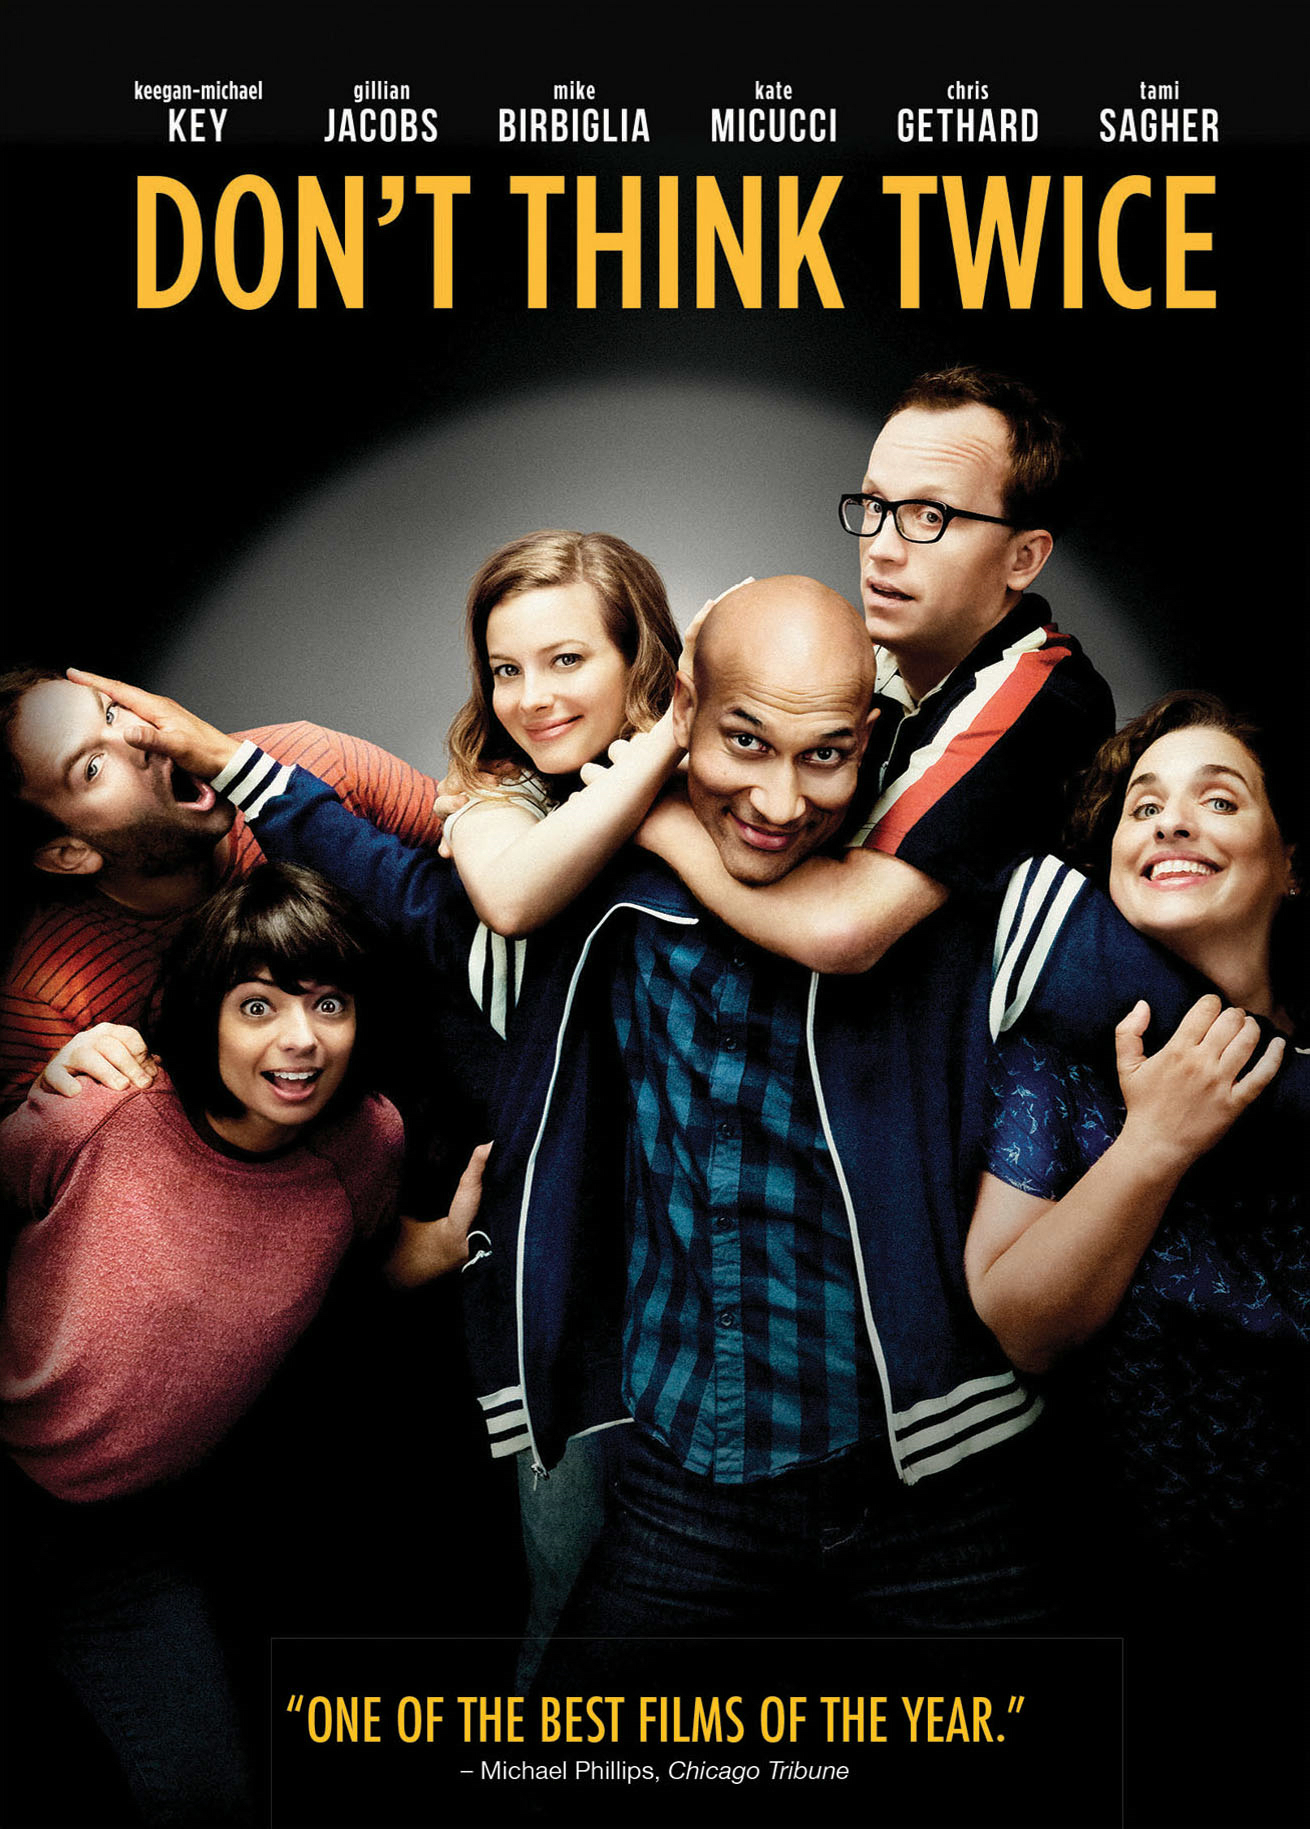 Don't Think Twice - DVD [ 2016 ]  - Comedy Movies On DVD - Movies On GRUV